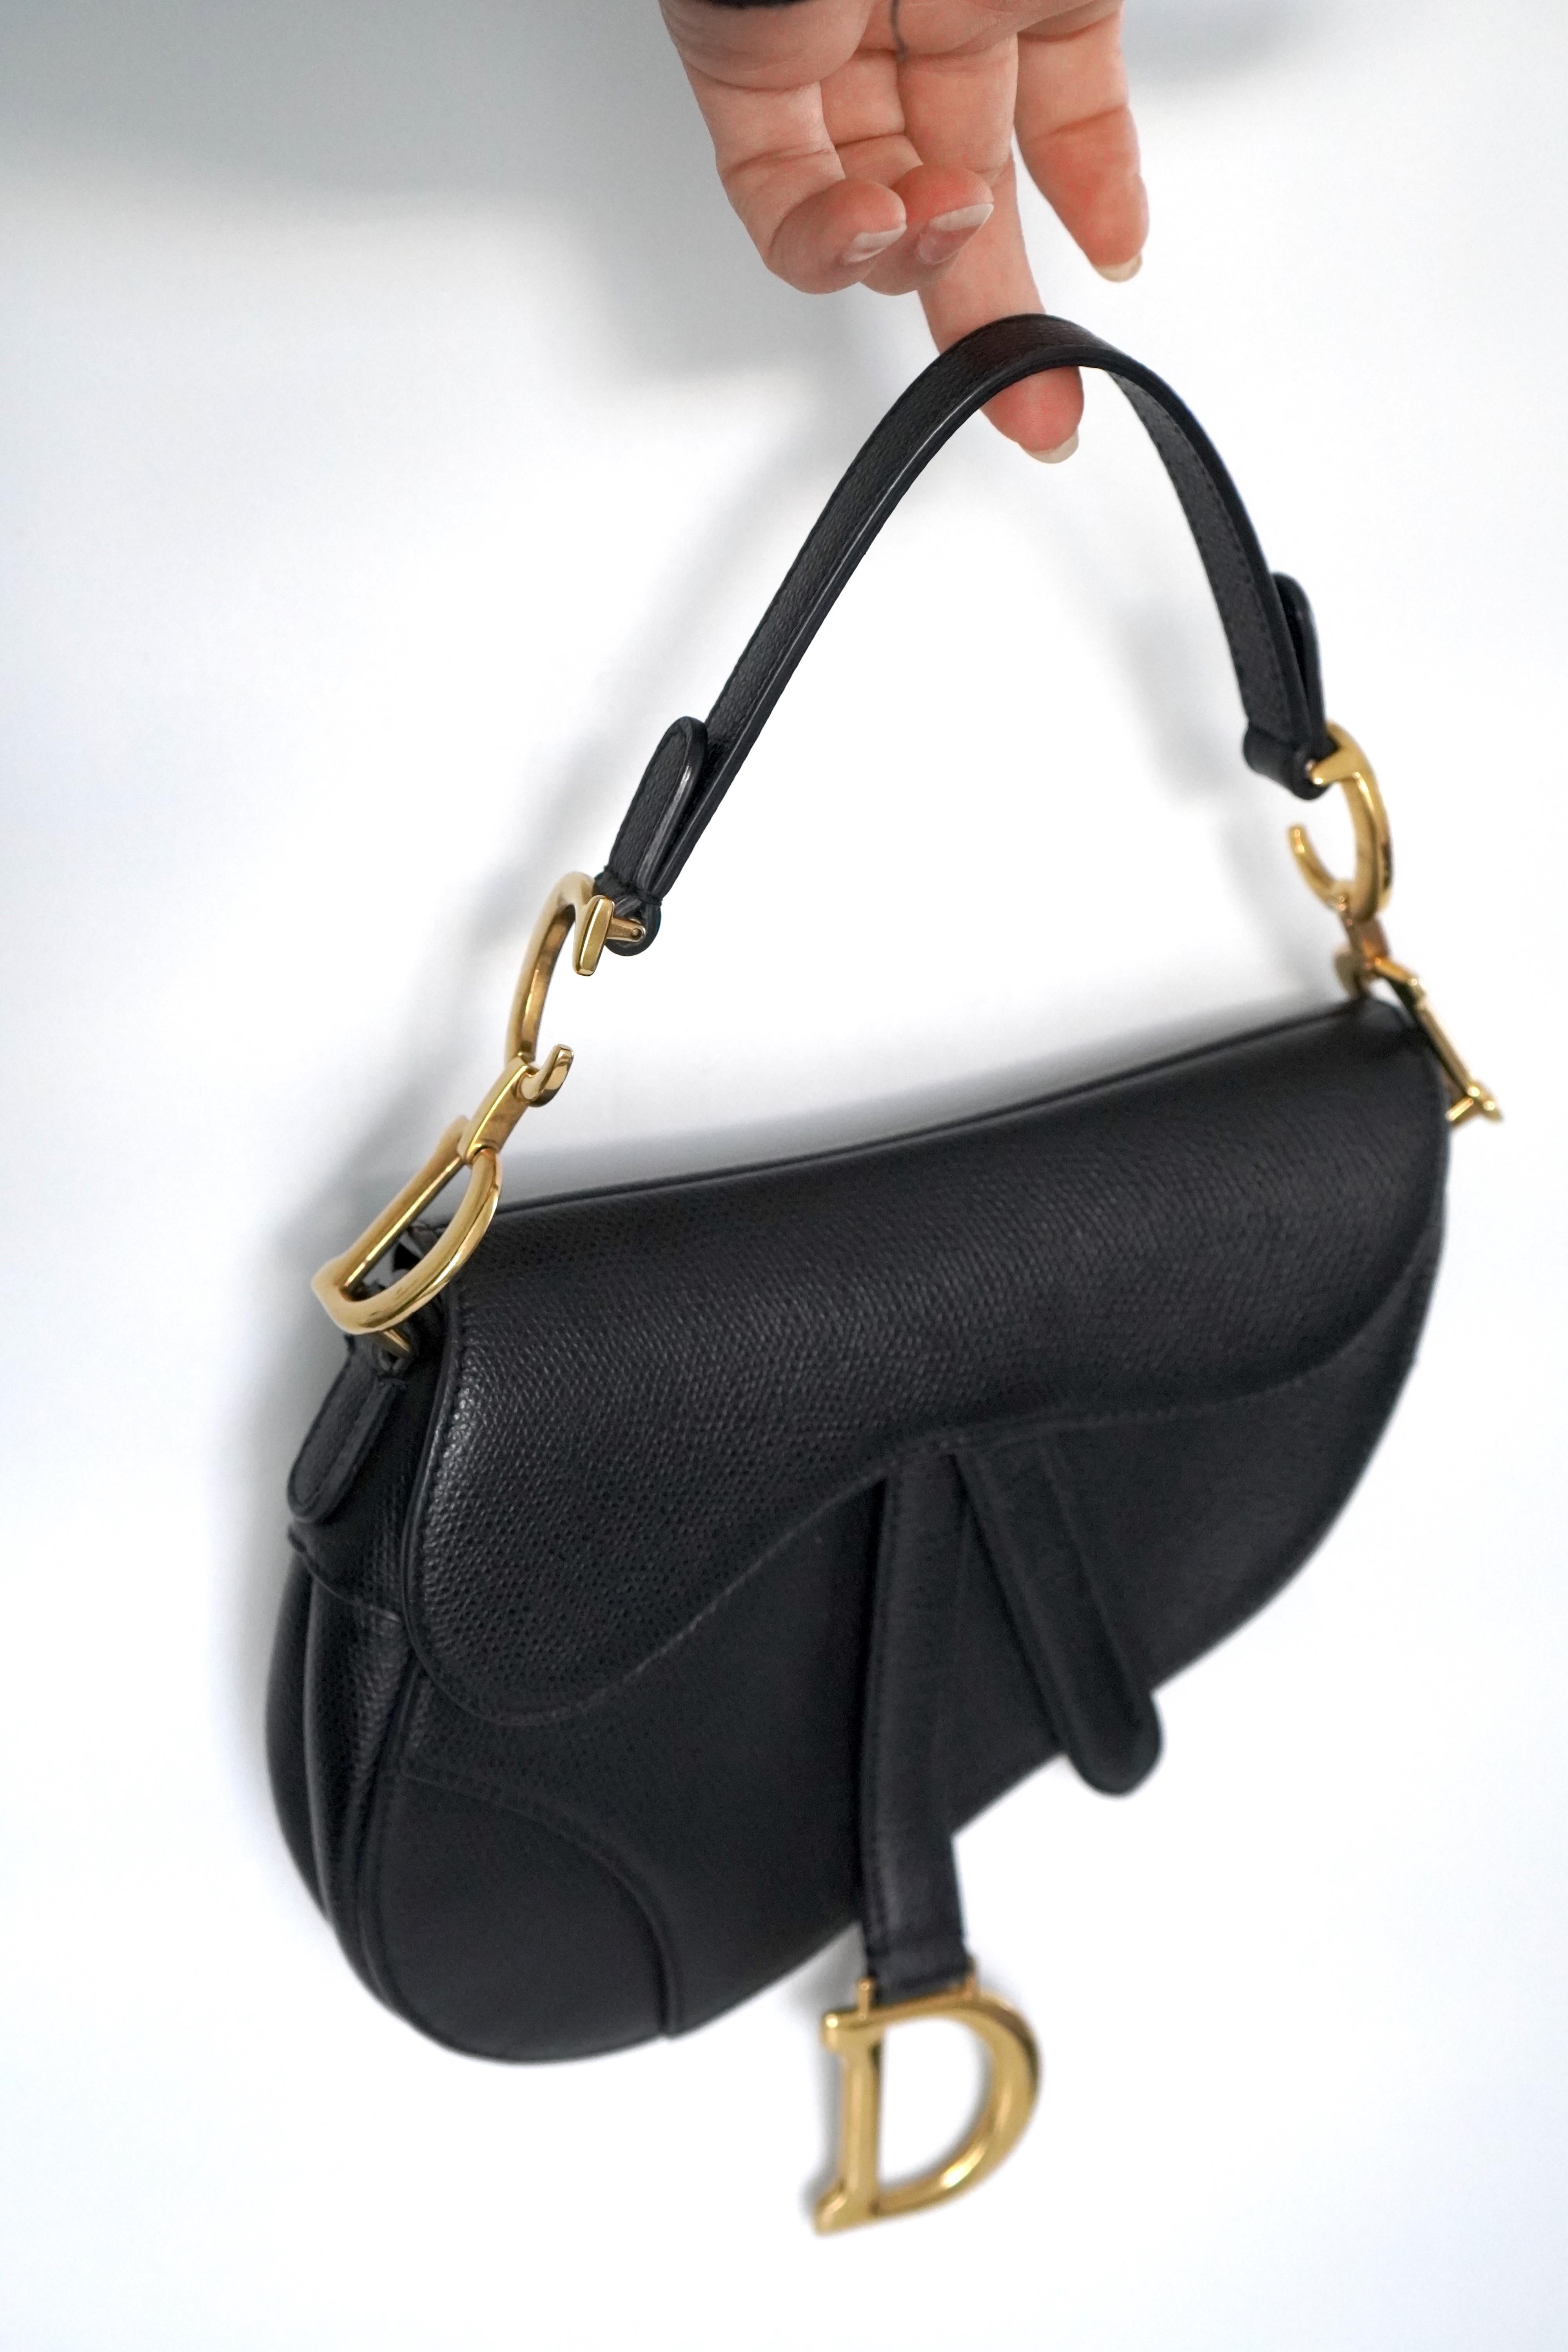 Christian Dior Black Leather Mini Saddle Bag 

• Grained Calfskin
• D stirrup clasp with magnetic strap closure
• CD signature on the strap
• Back pocket
• Made in Italy
• Gold-Tone Hardware
• Flat Handle
• Single Exterior Pocket
• Suede Lining
•